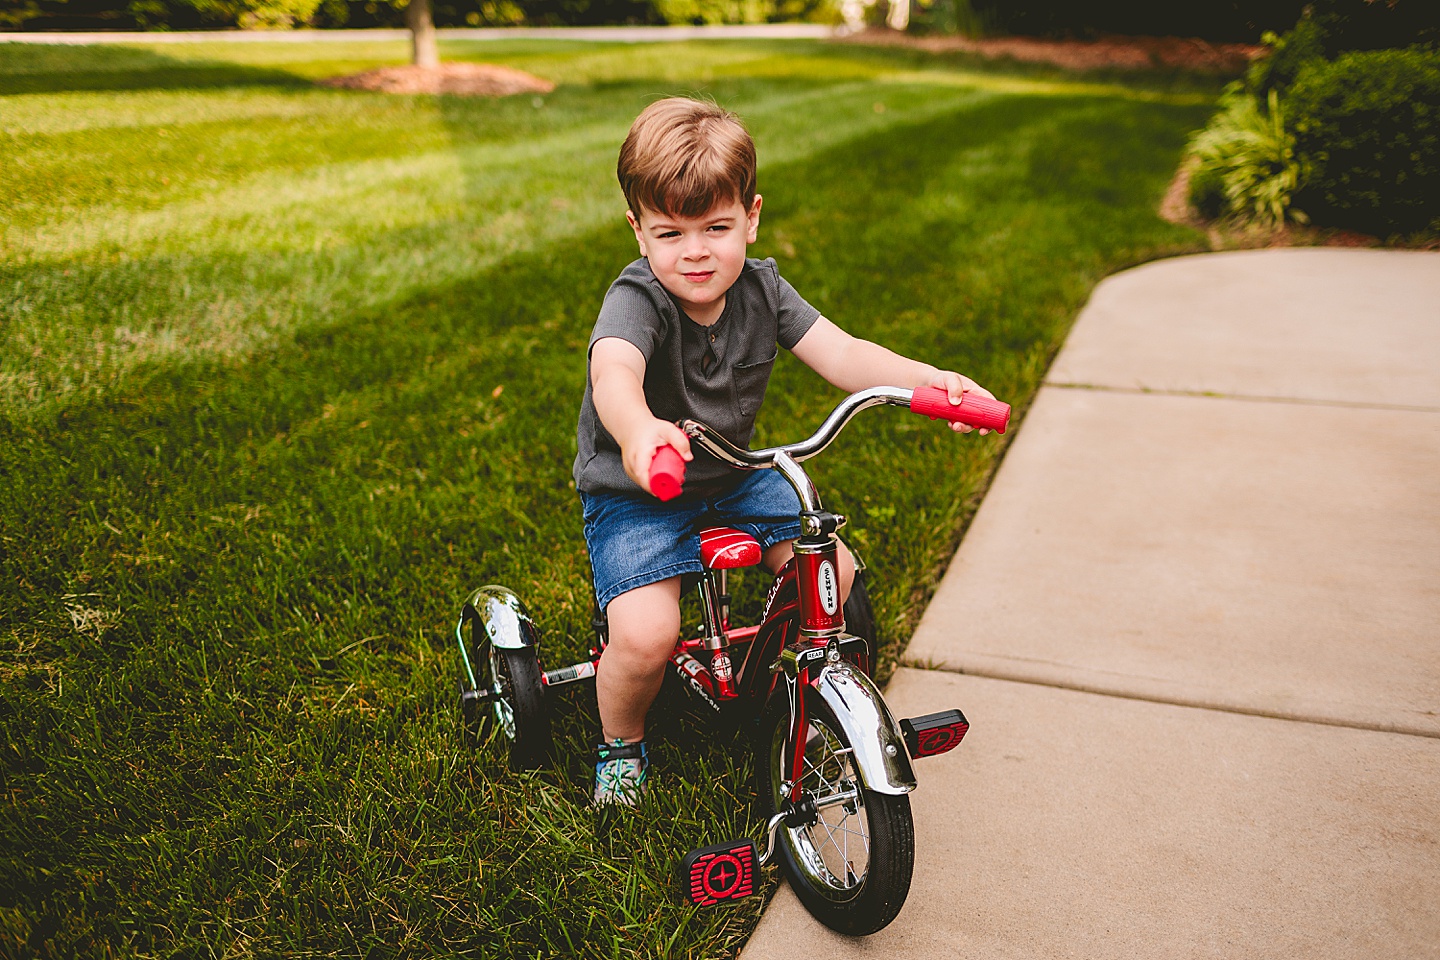 Child riding a tricycle through yard